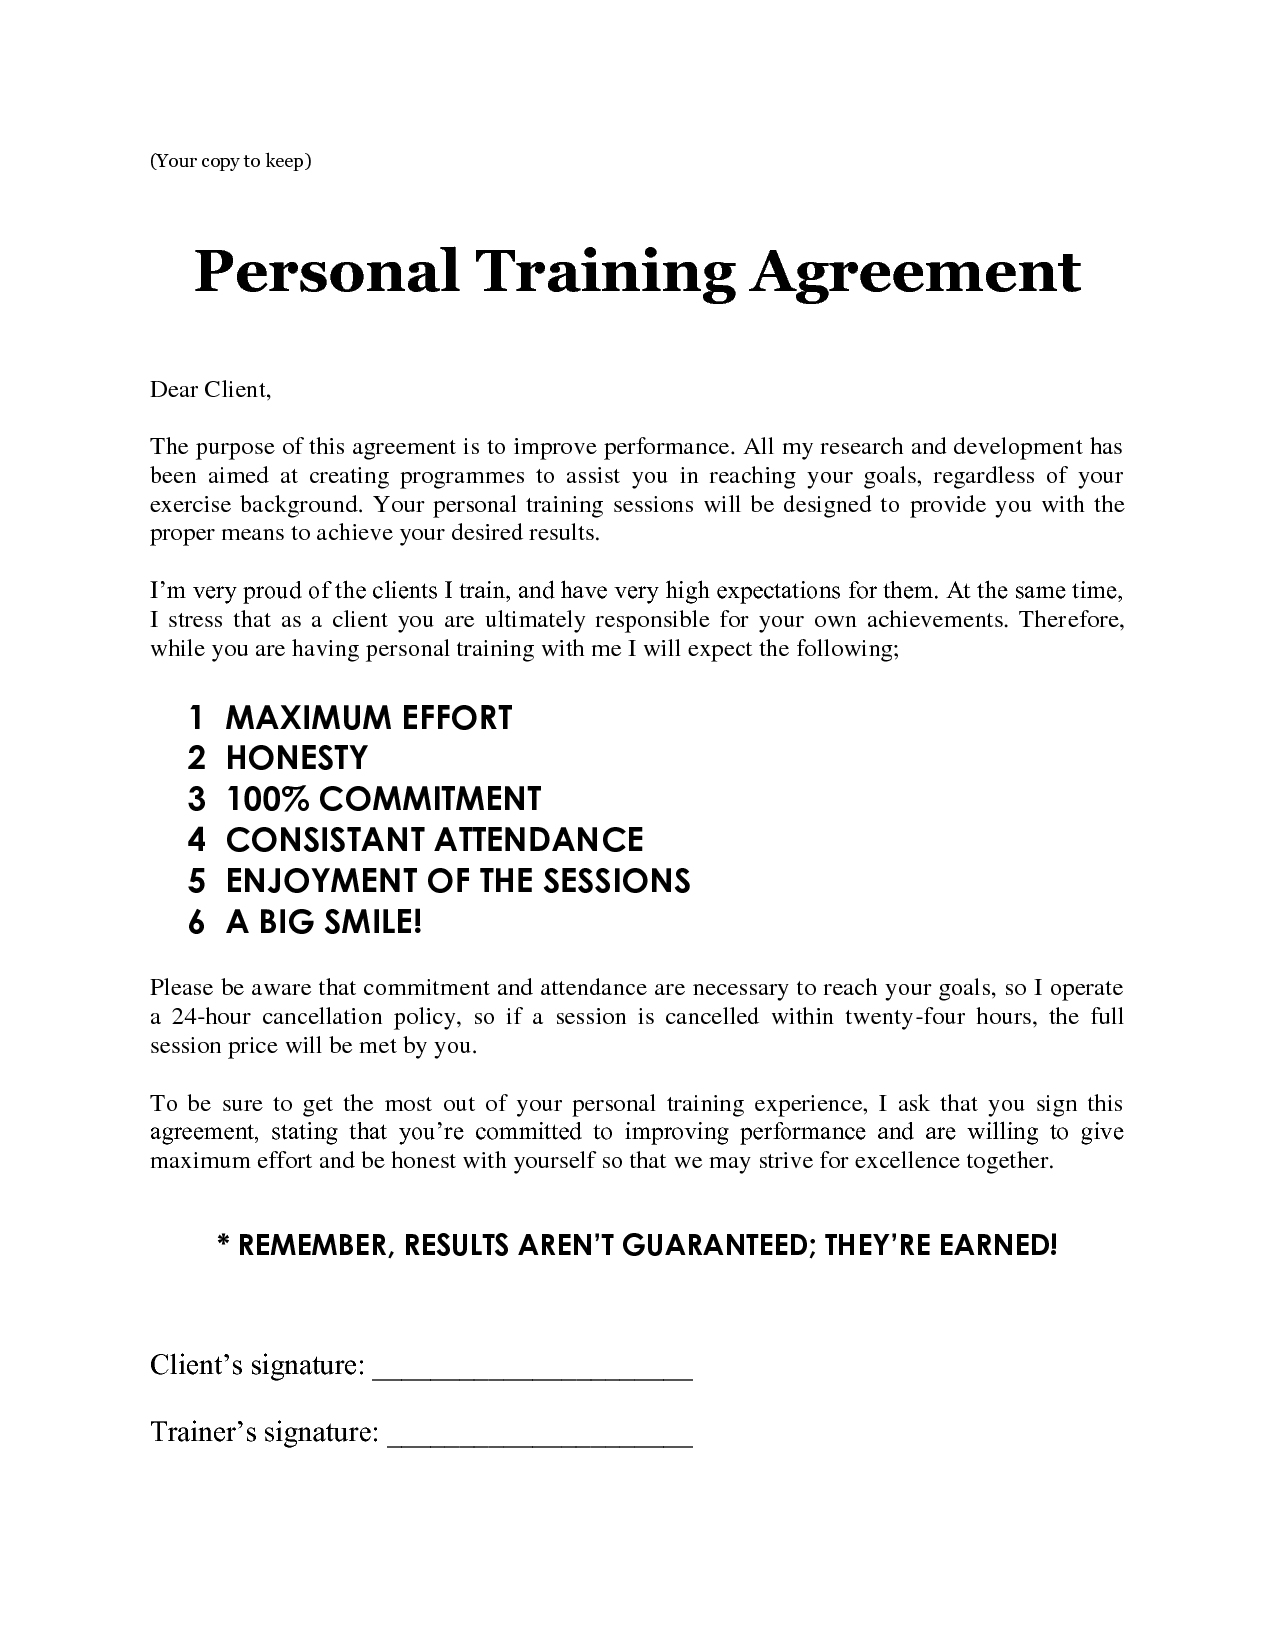 sales-rebate-agreement-template-contract-new-personal-training